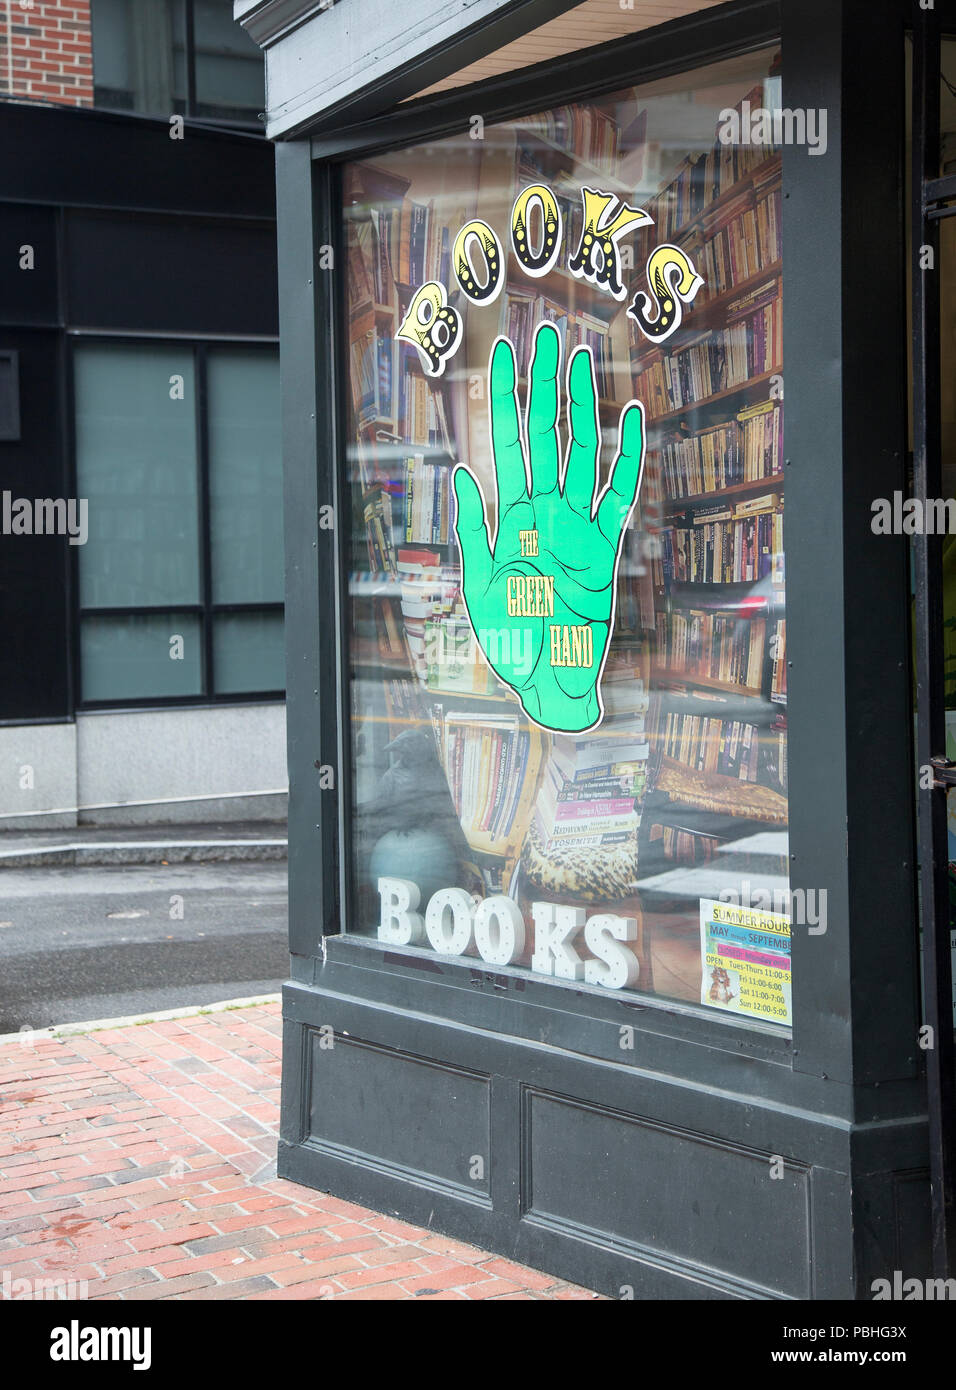 A book store in Portland, Maine Stock Photo